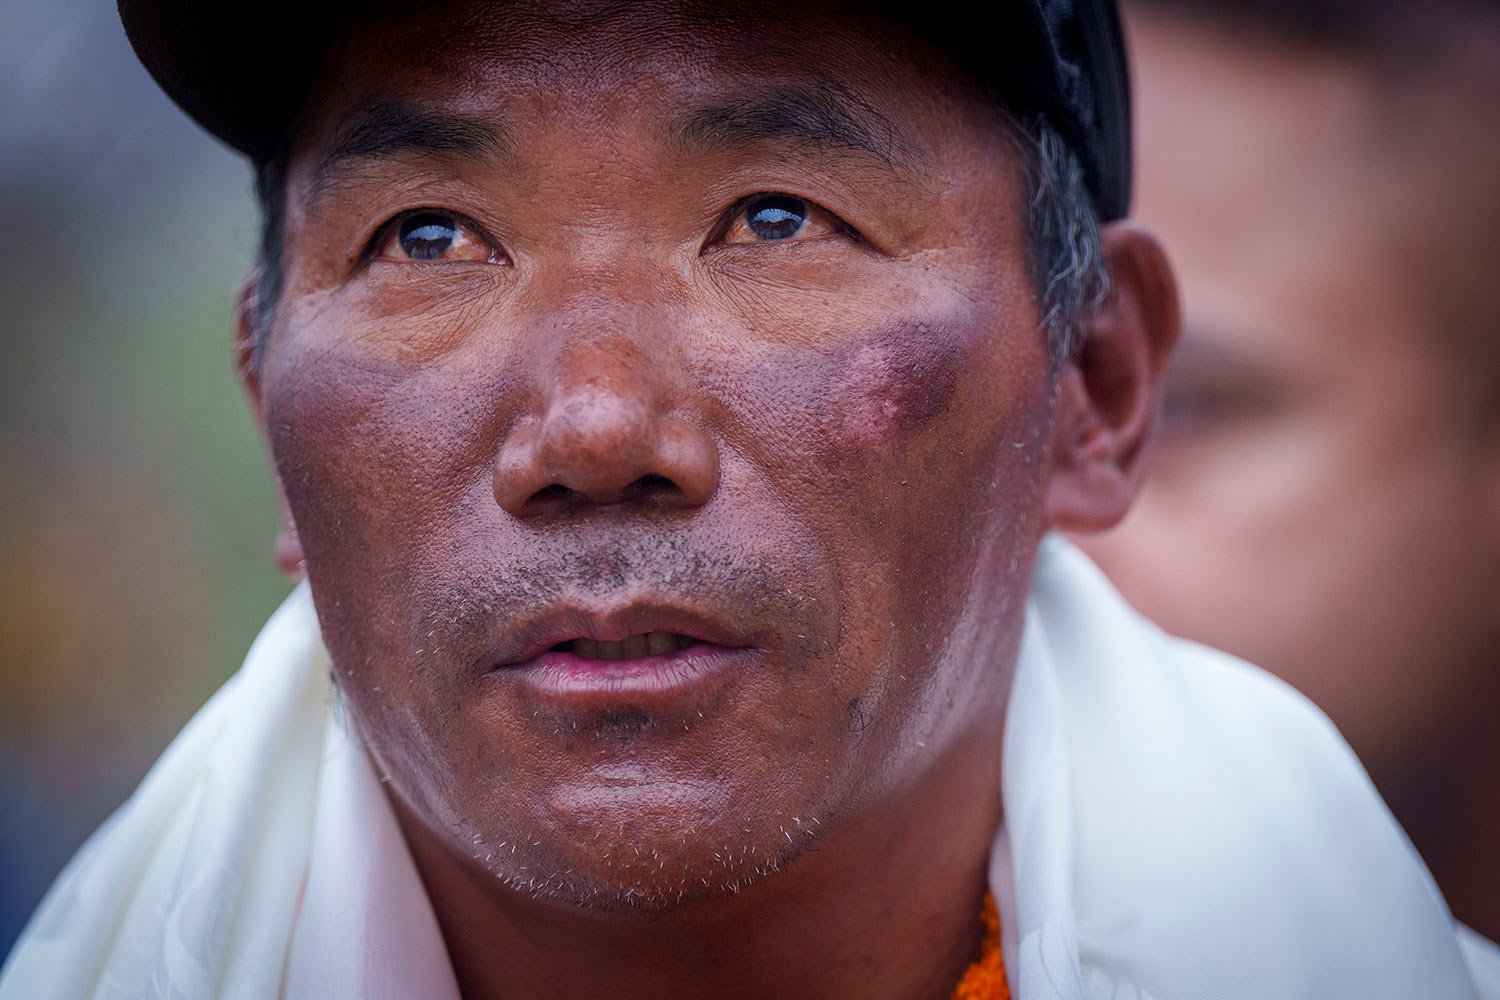  Veteran Sherpa guide Kami Rita arrives at the airport in Kathmandu, Nepal, Thursday, May 25, 2023, after scaling Mount Everest for the 28th time and beating his own record within a week, as two guides compete with each other for the title of most cl